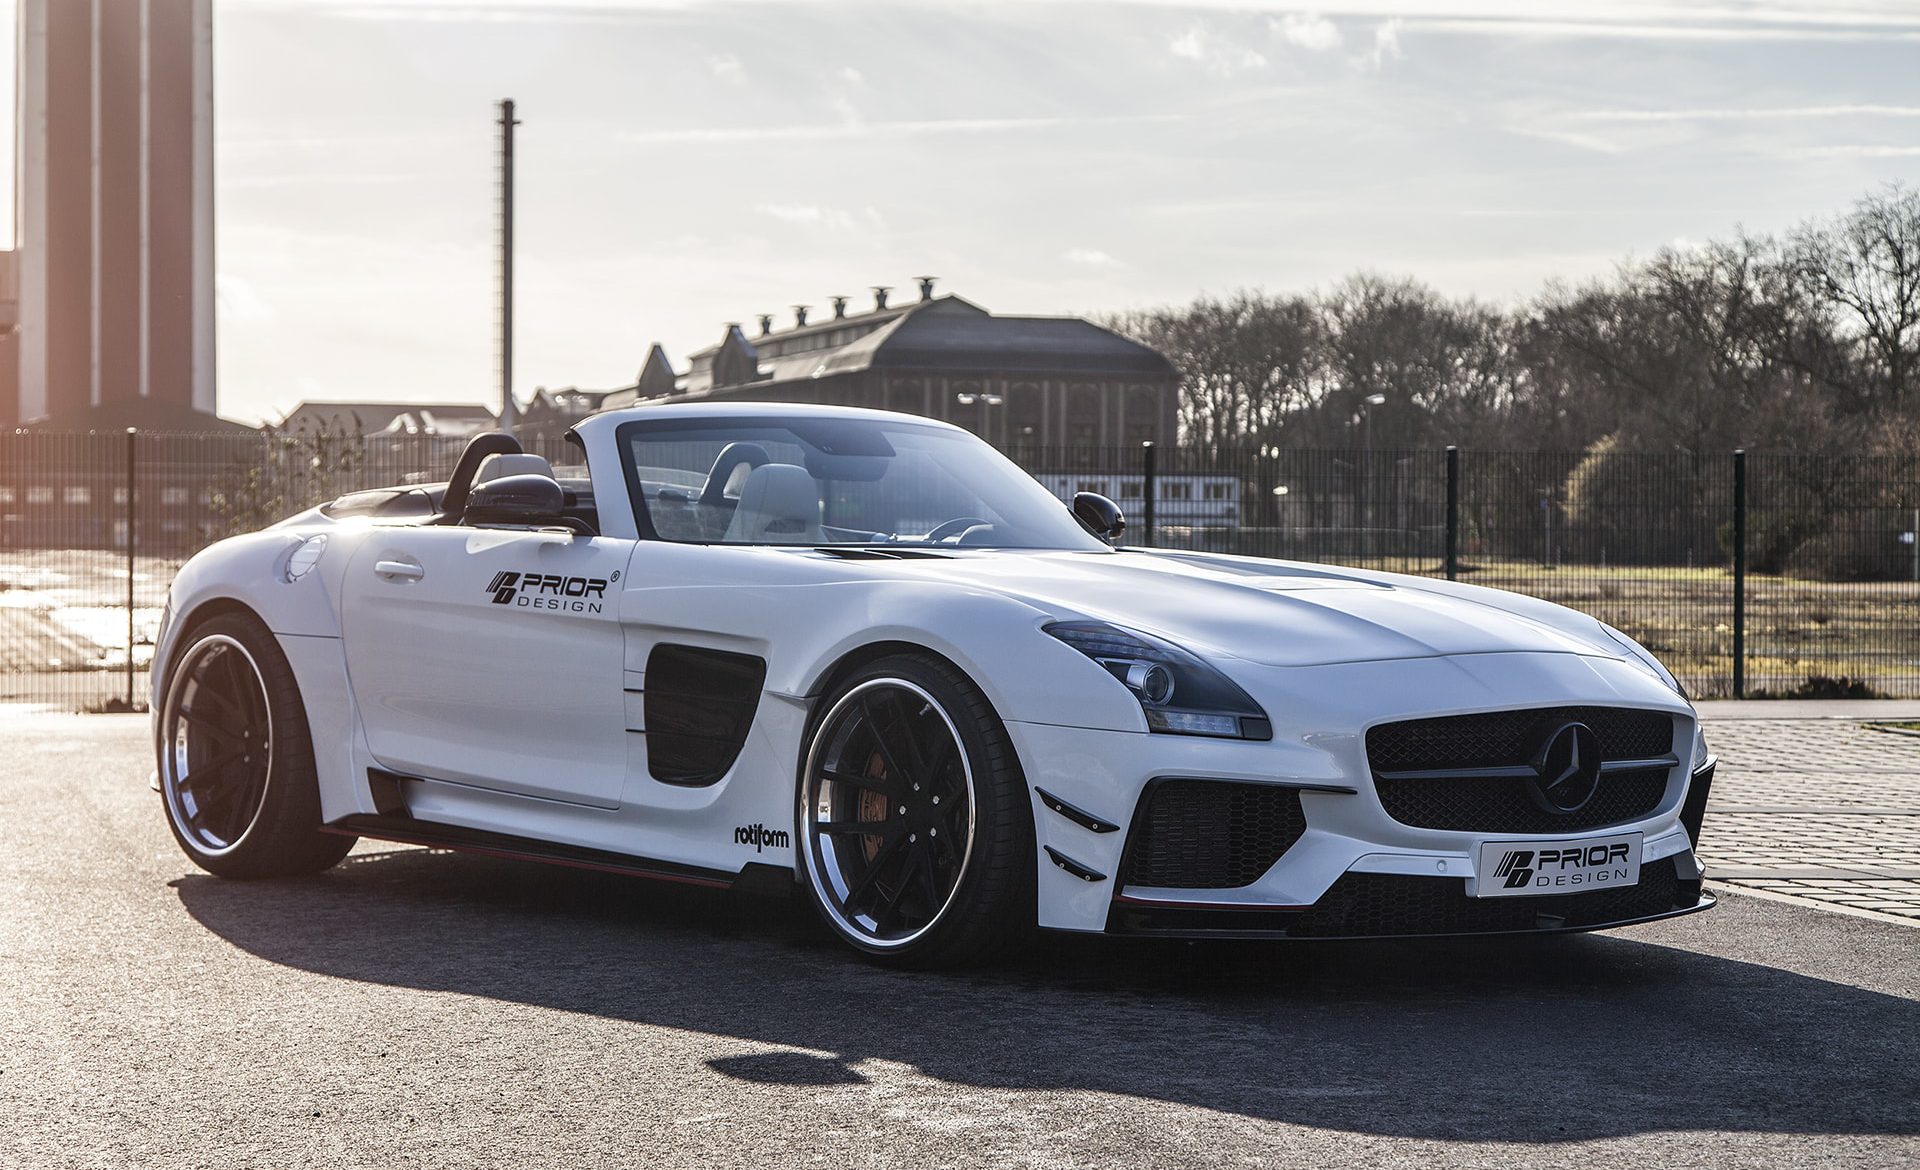 PD900GT Widebody Front Widenings for Mercedes SLS AMG Roadster [R197]